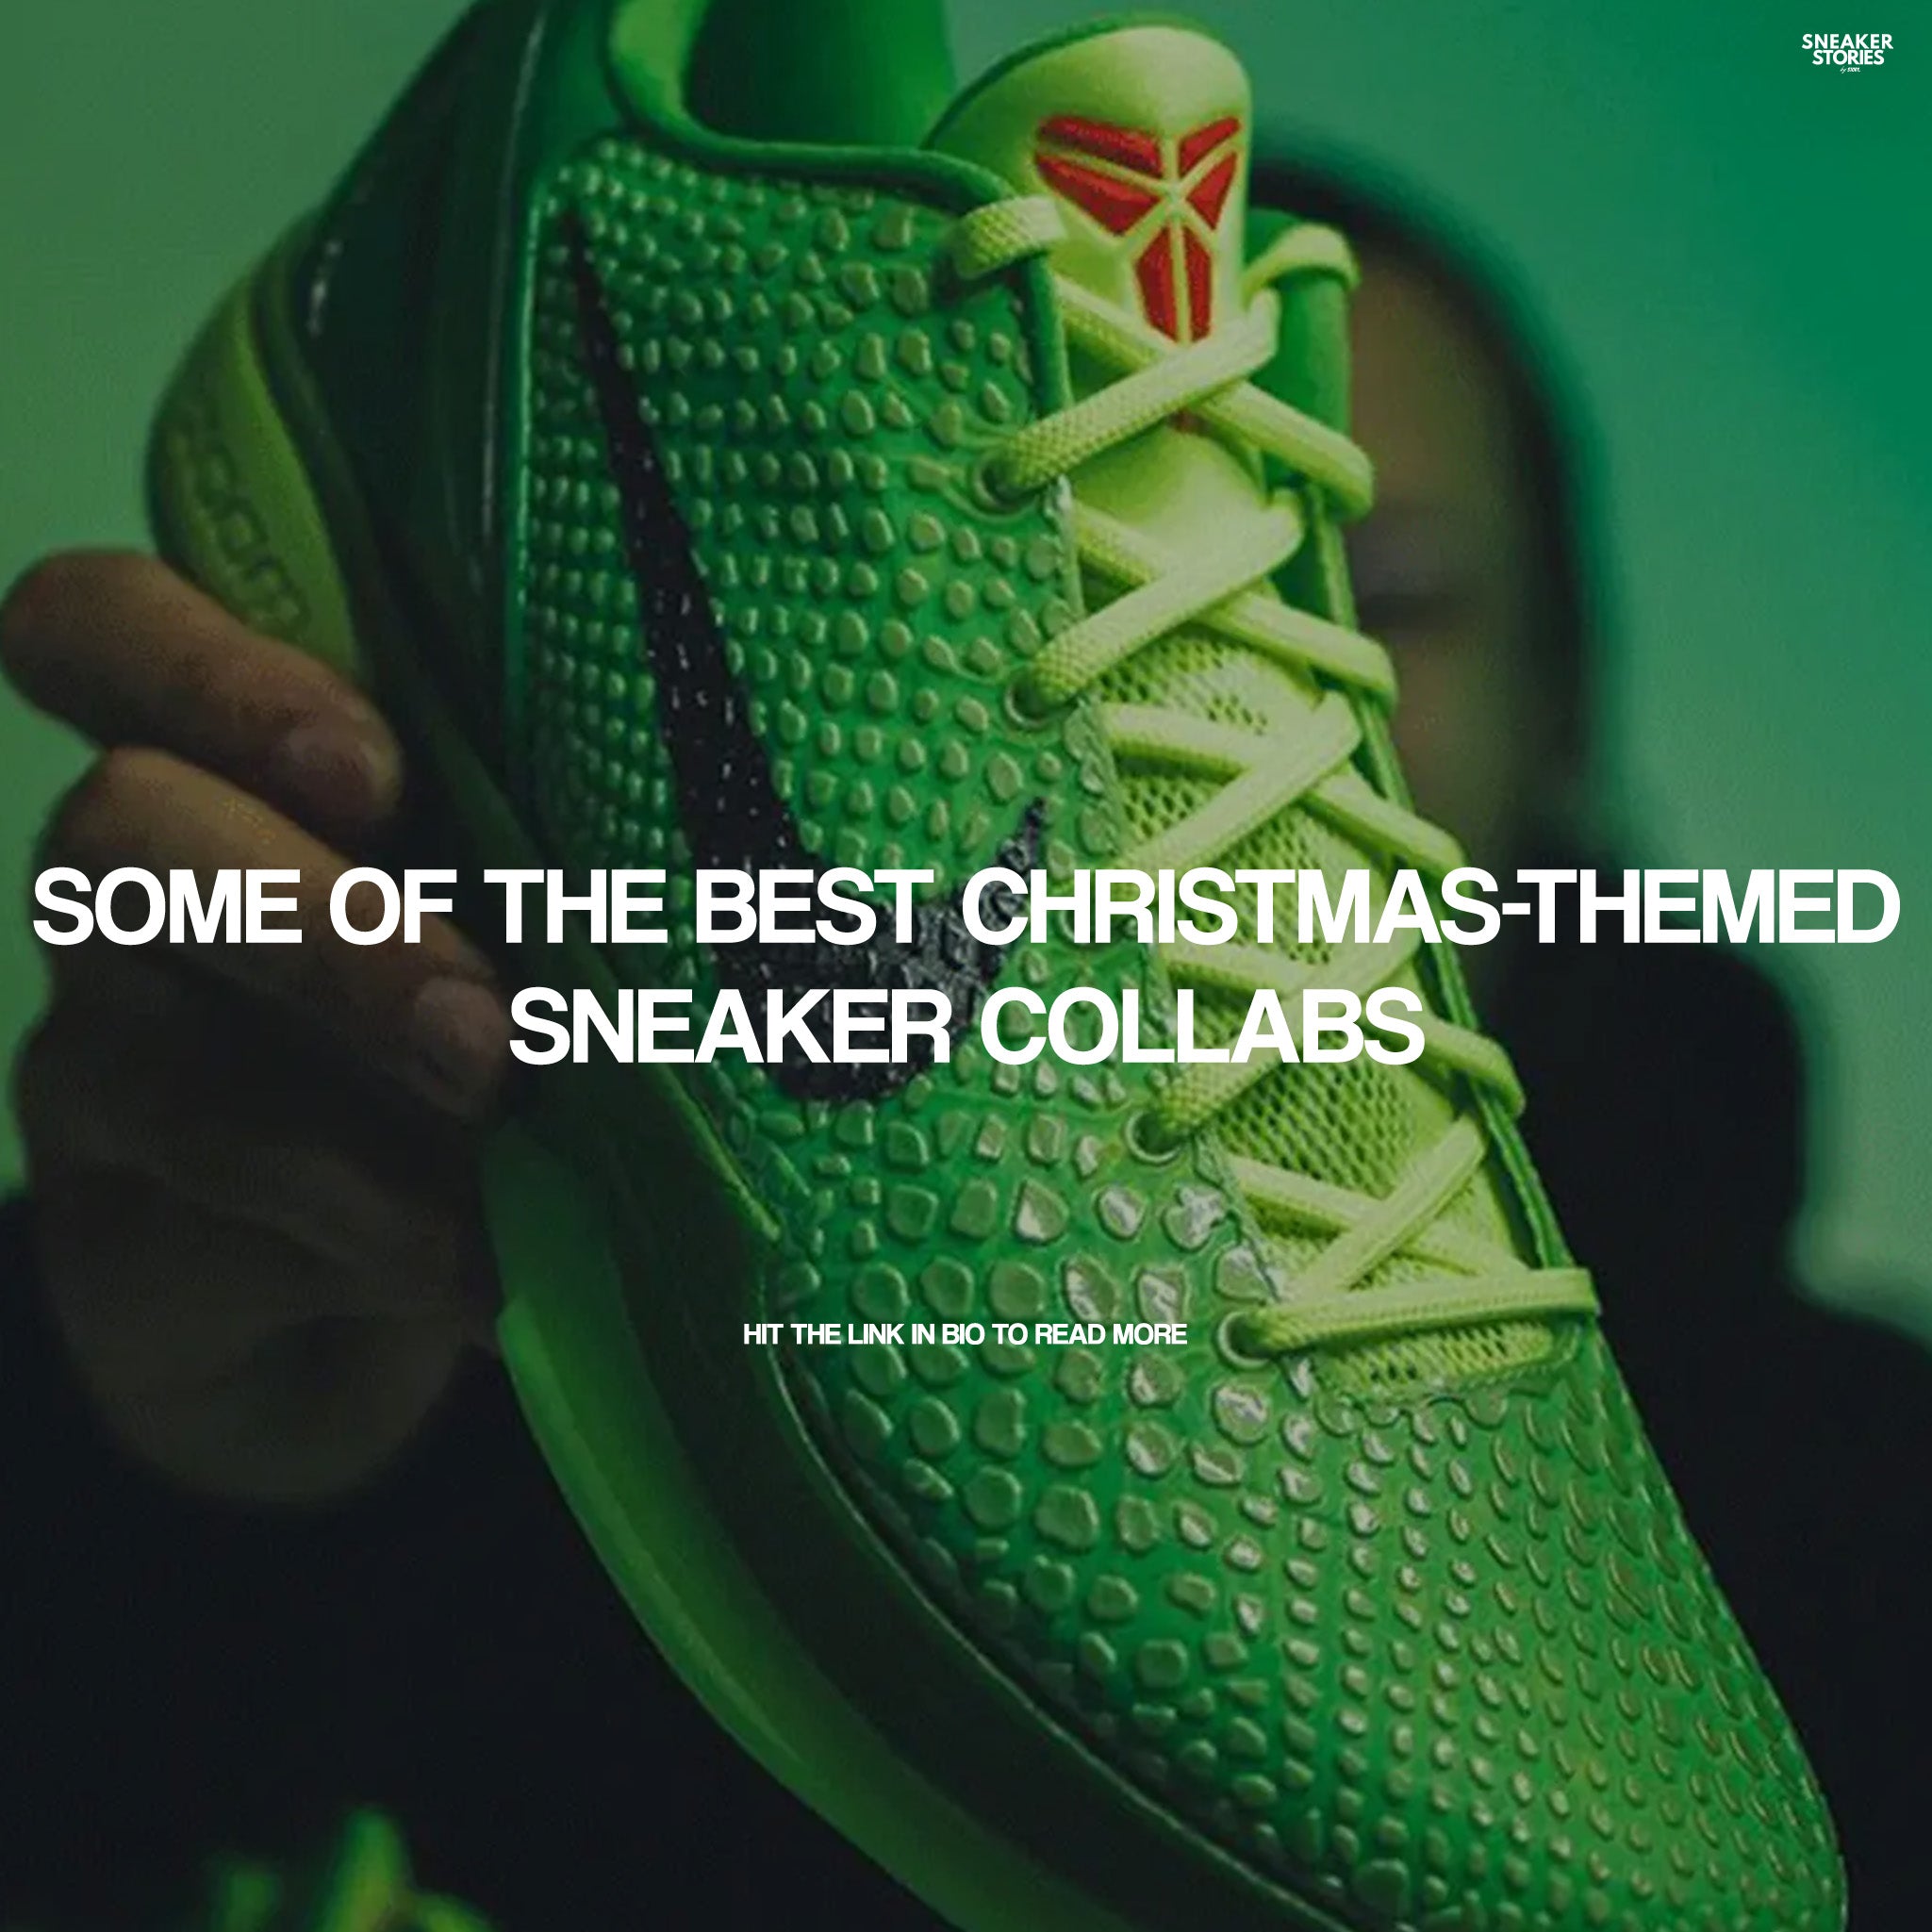 Some of the best Christmas-themed sneaker collabs